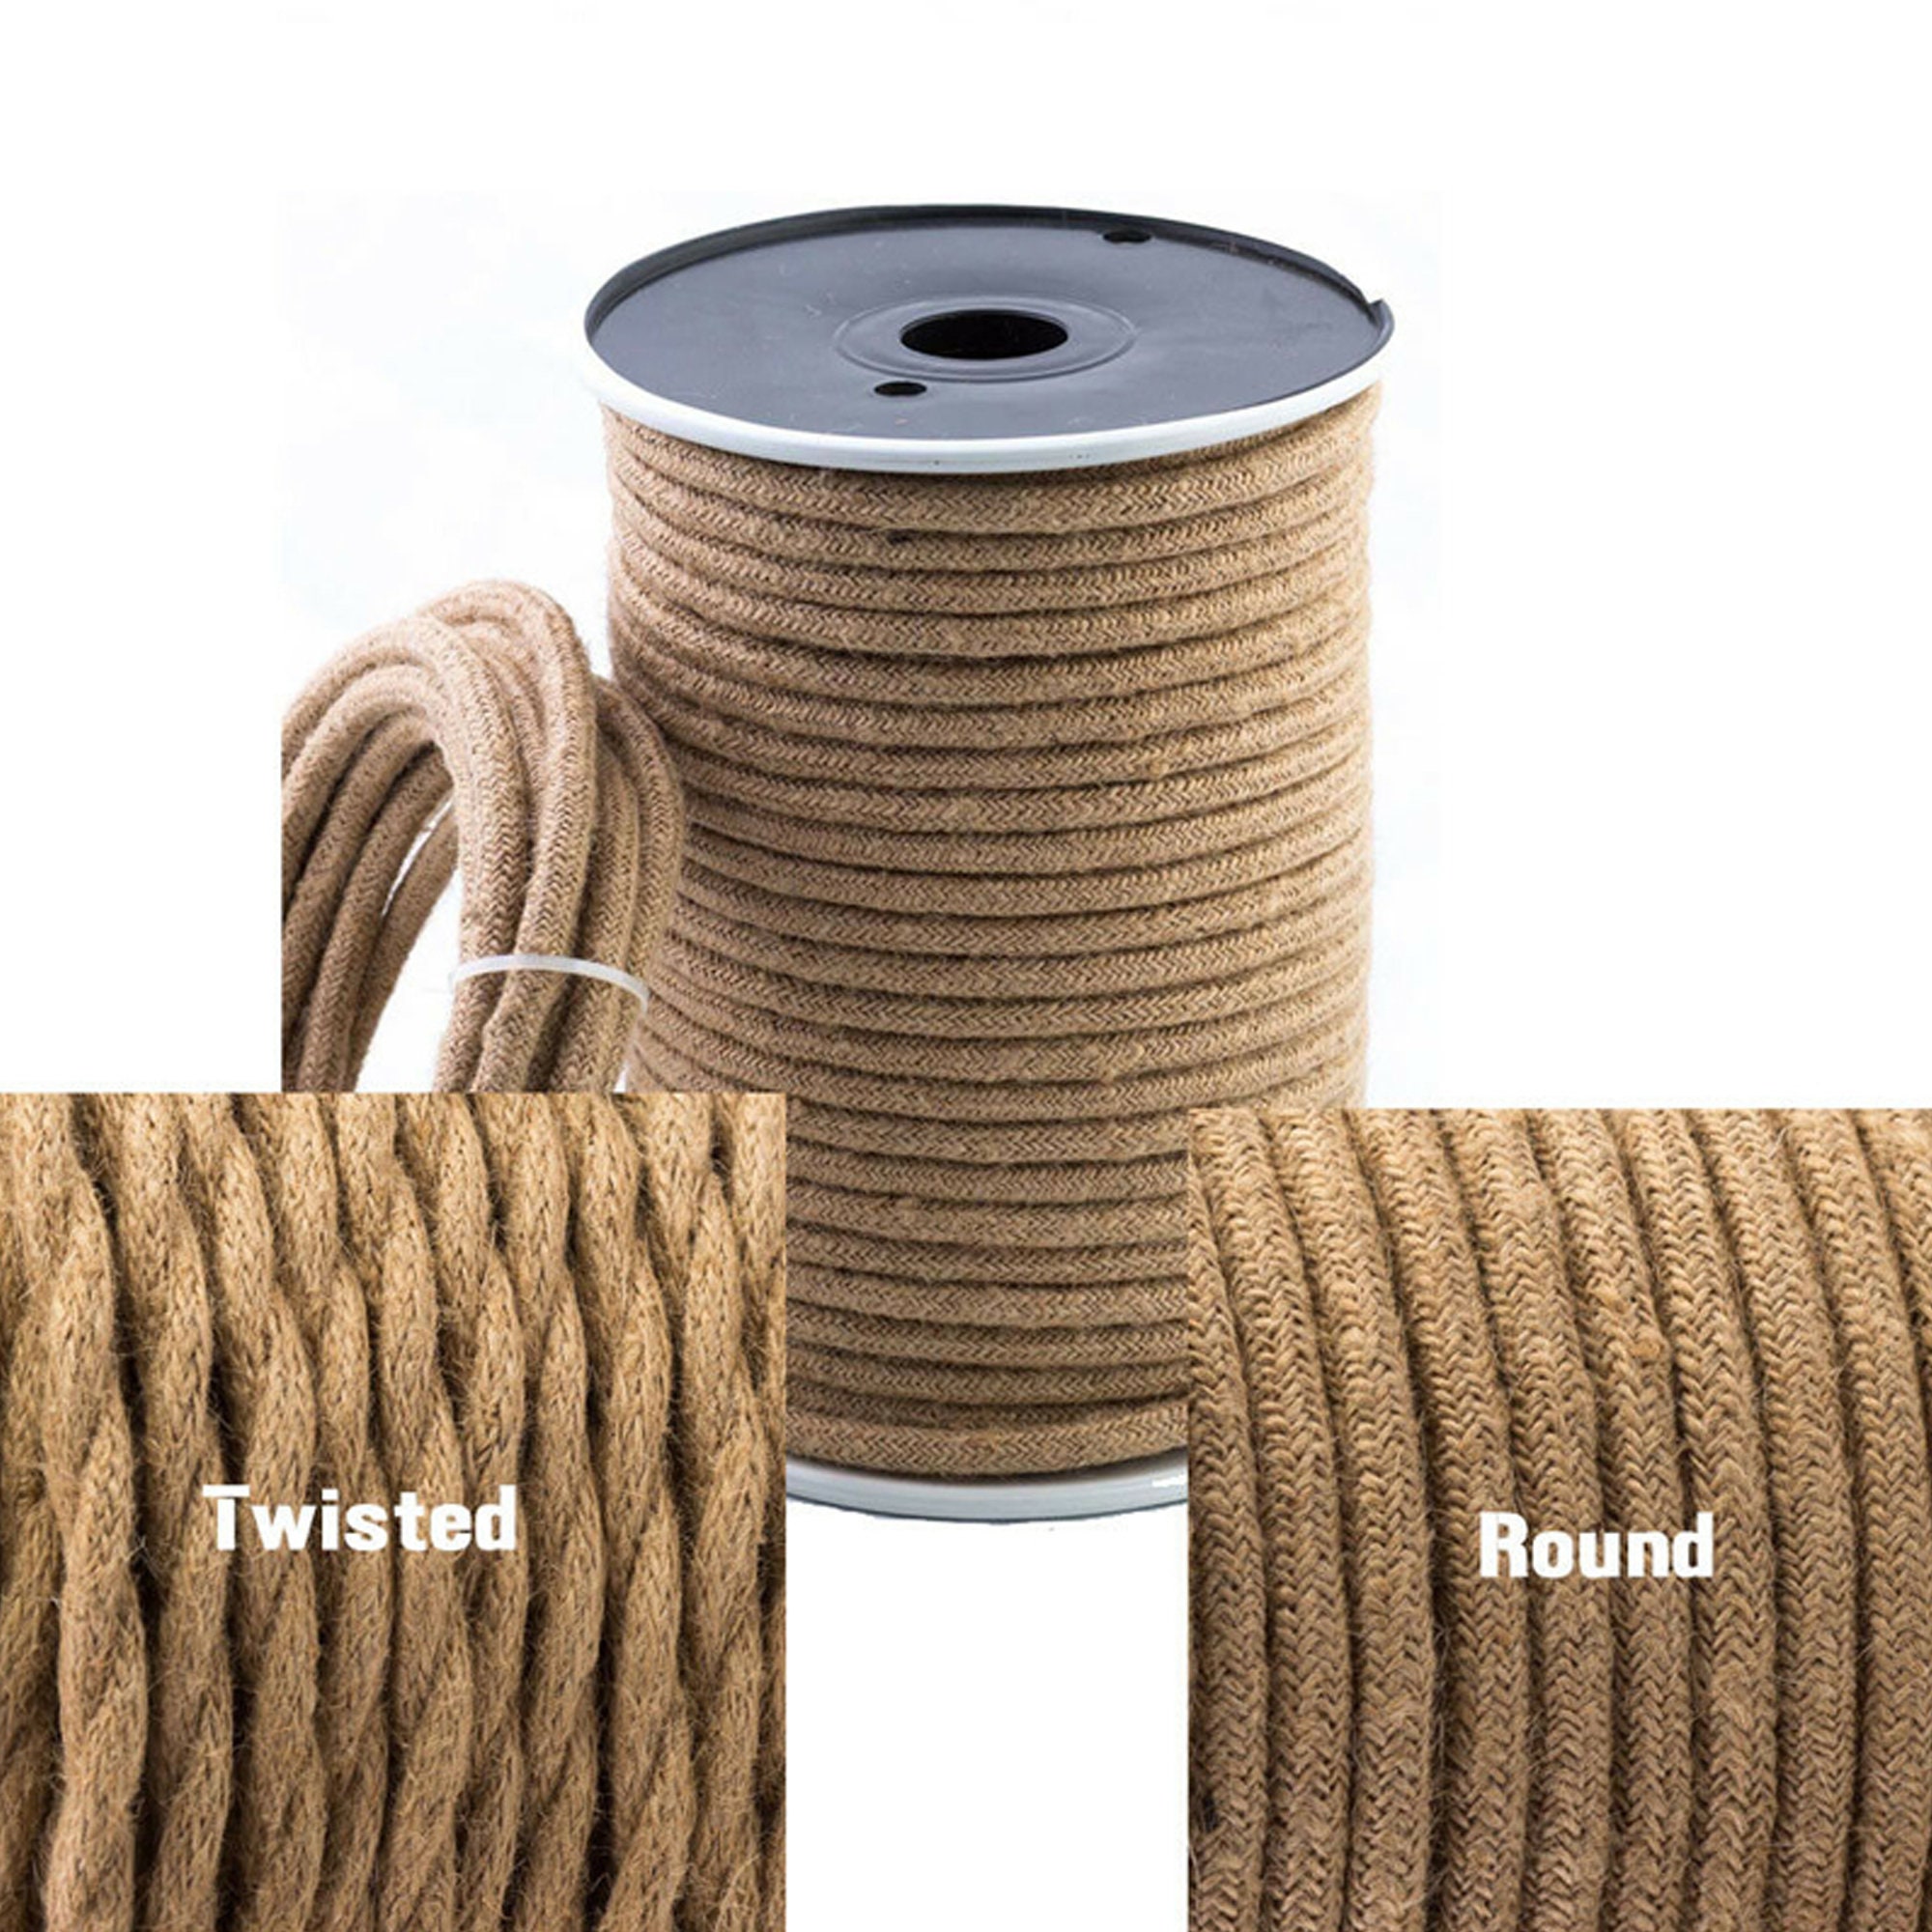 1pc/3pcs 3937.01 Inch Hemp Rope Hand-woven Diy Thin Rope Jute Retro  Decorations Bundle Rope Simple Home Accessories Clothing